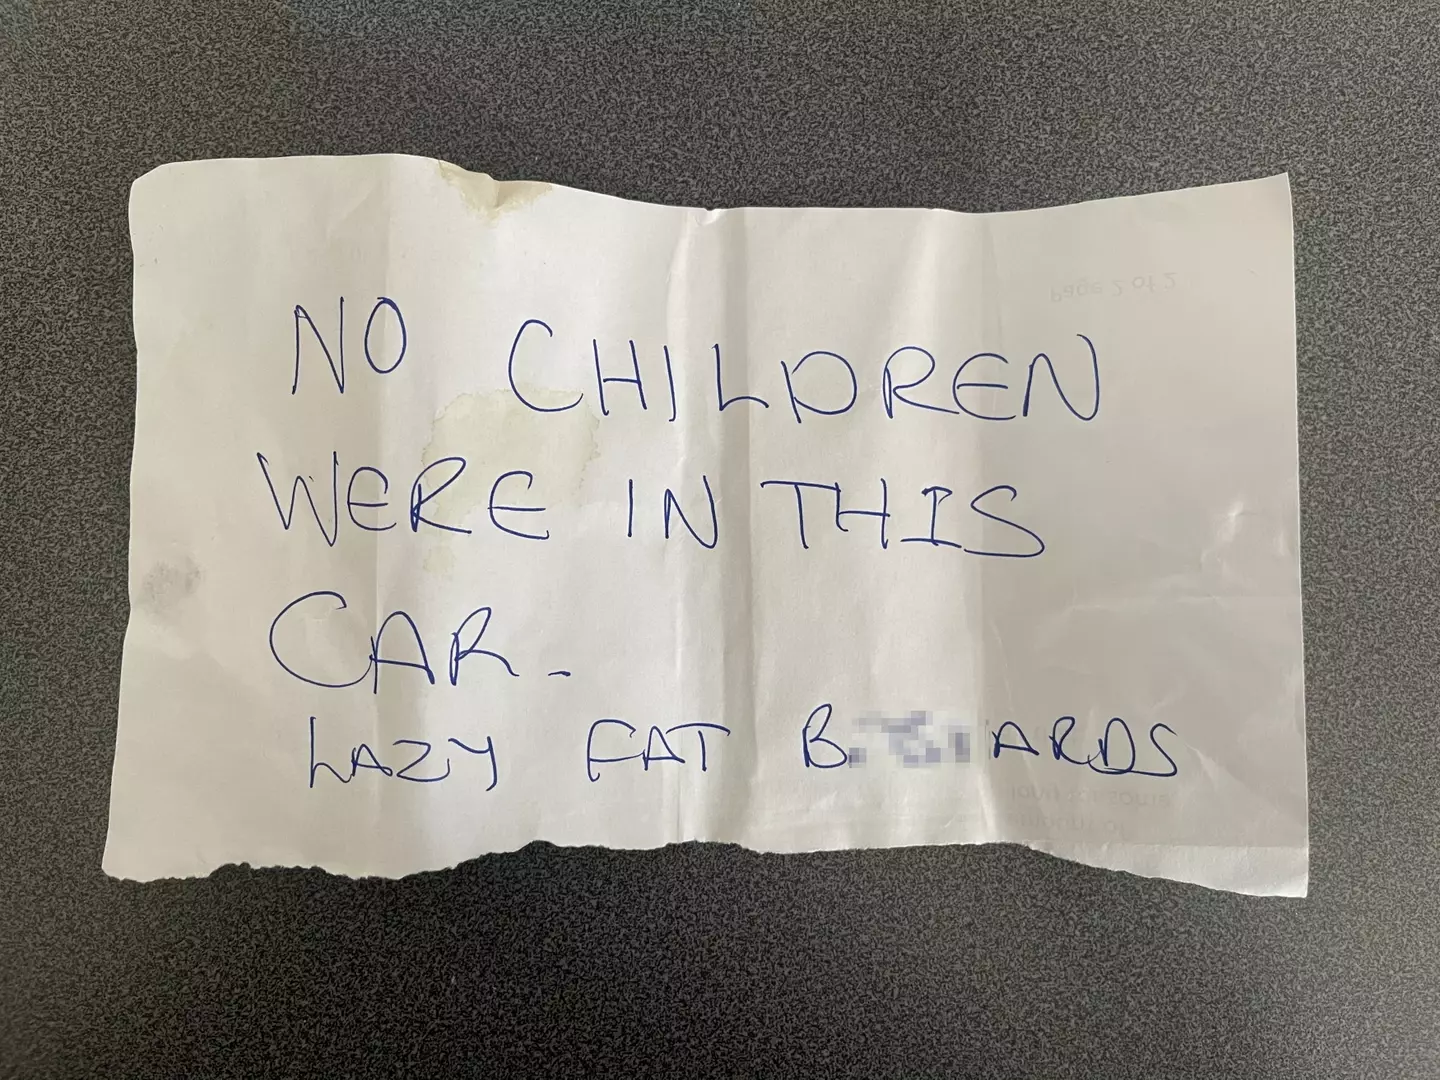 The note was found wedged under her windscreen.